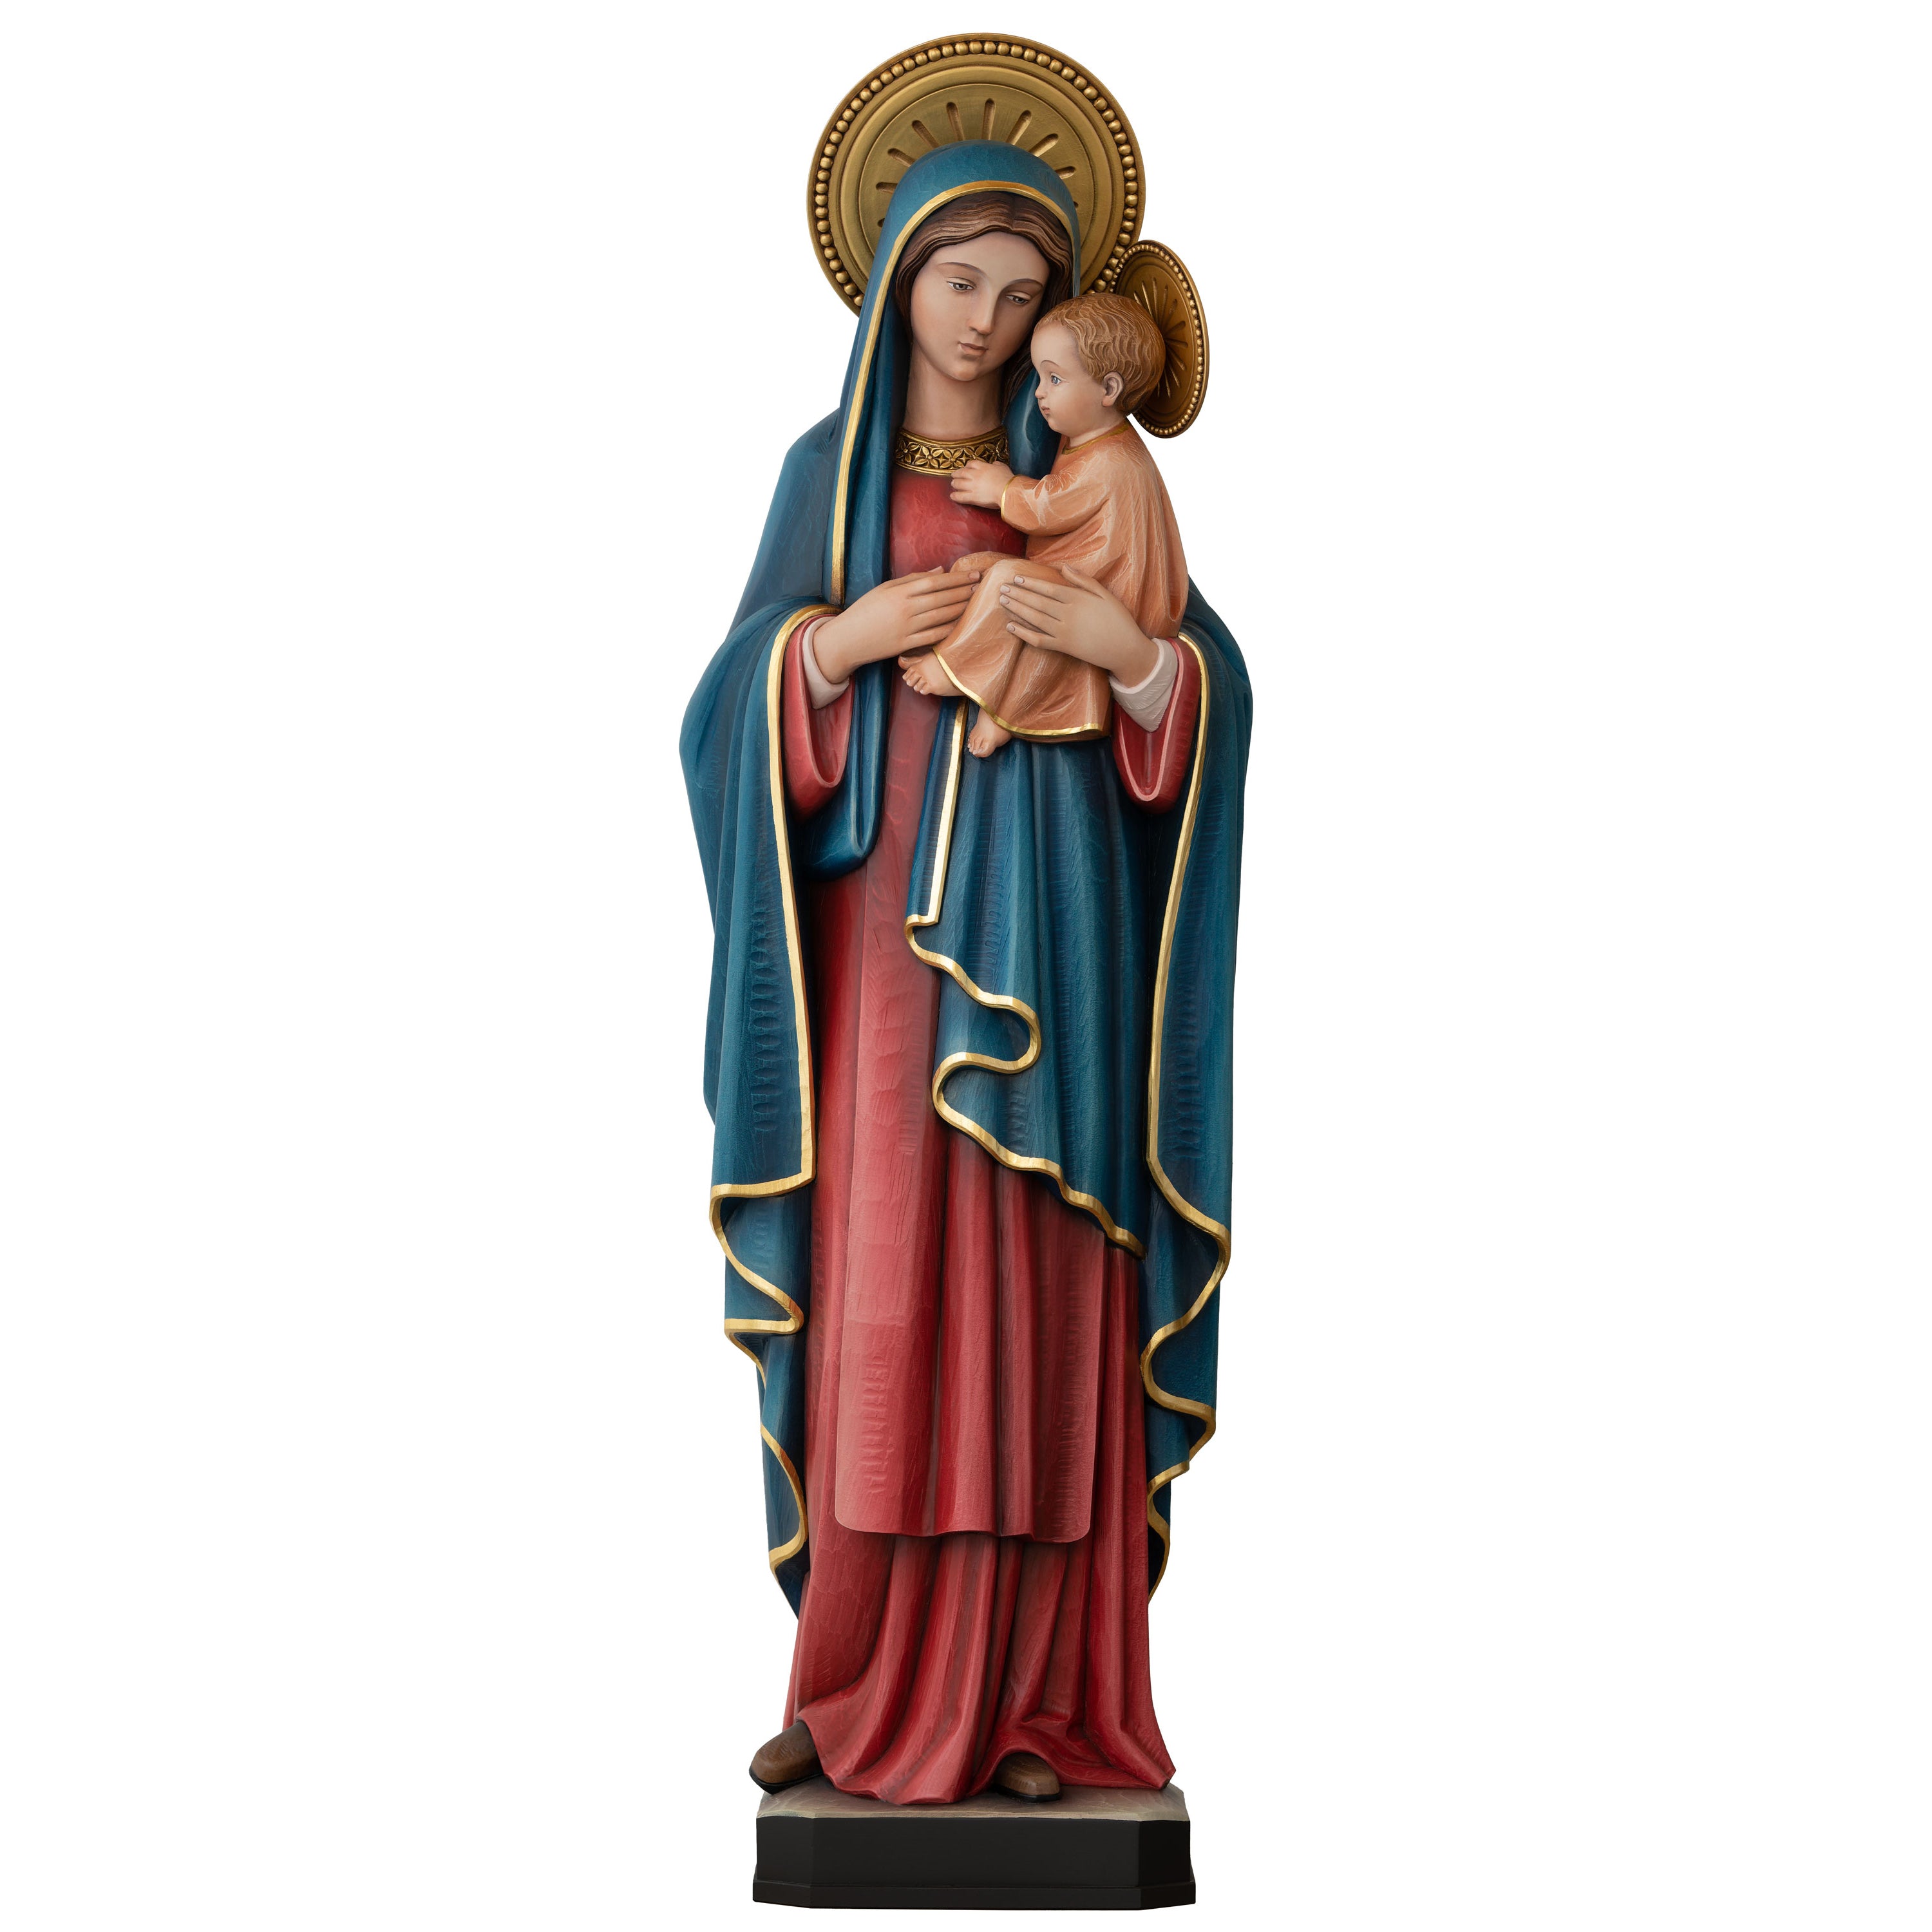 Our Lady of Good Counsel Wood Carved Church Statue